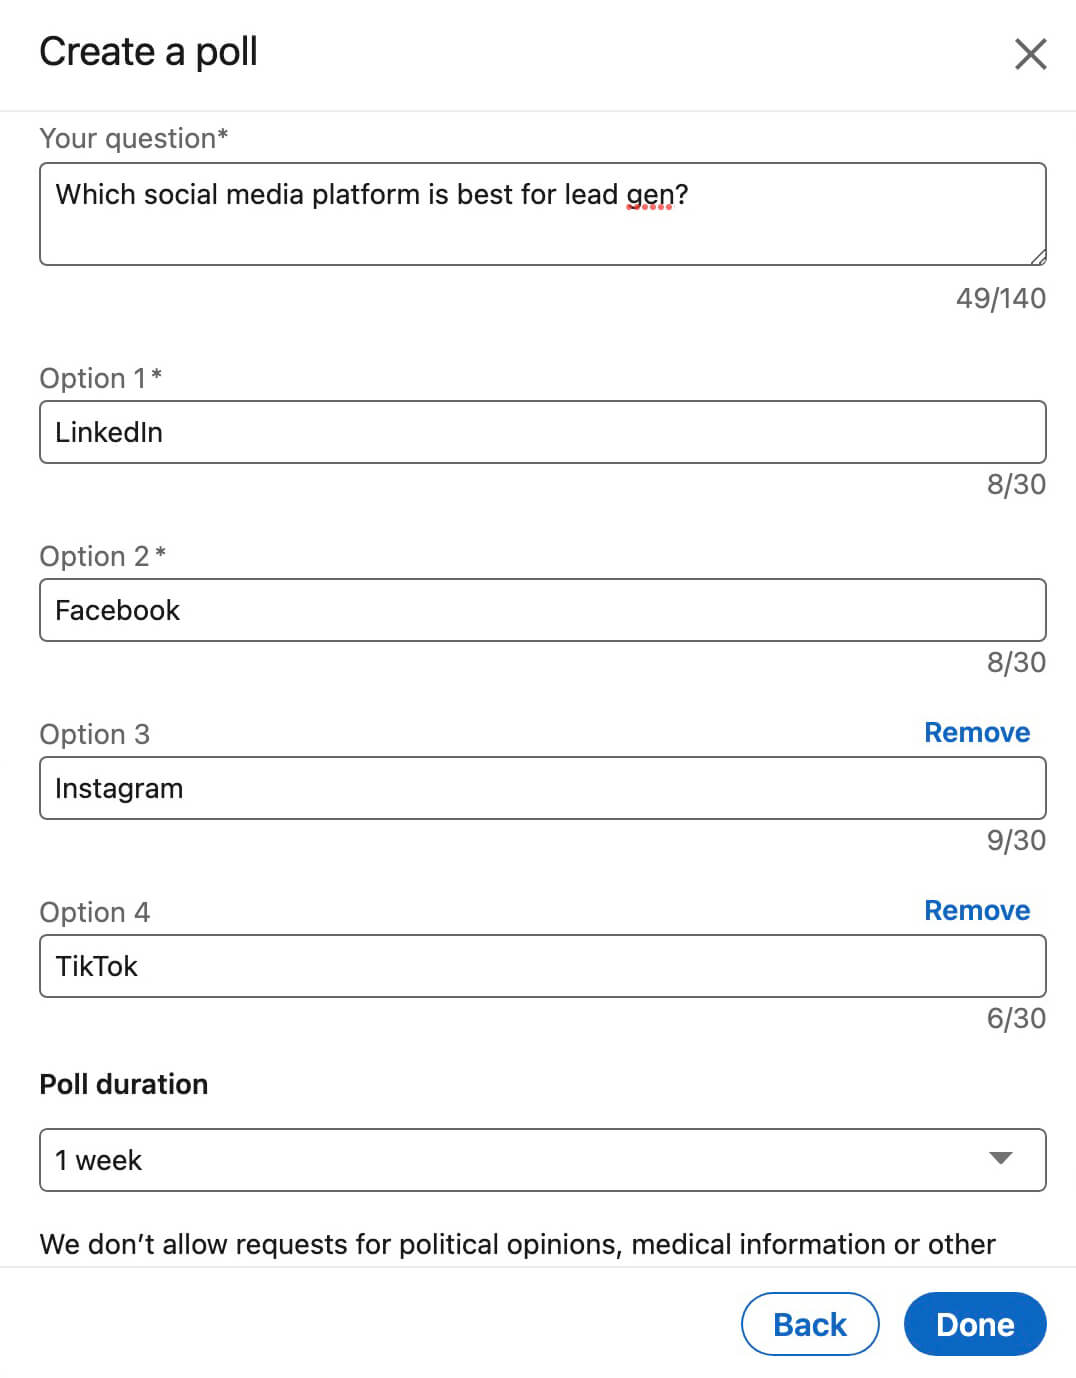 how-to-poll-customers-via-linkedin-posts-create-a-poll-enter-question-provide-up-to-four-answer-options-example-6